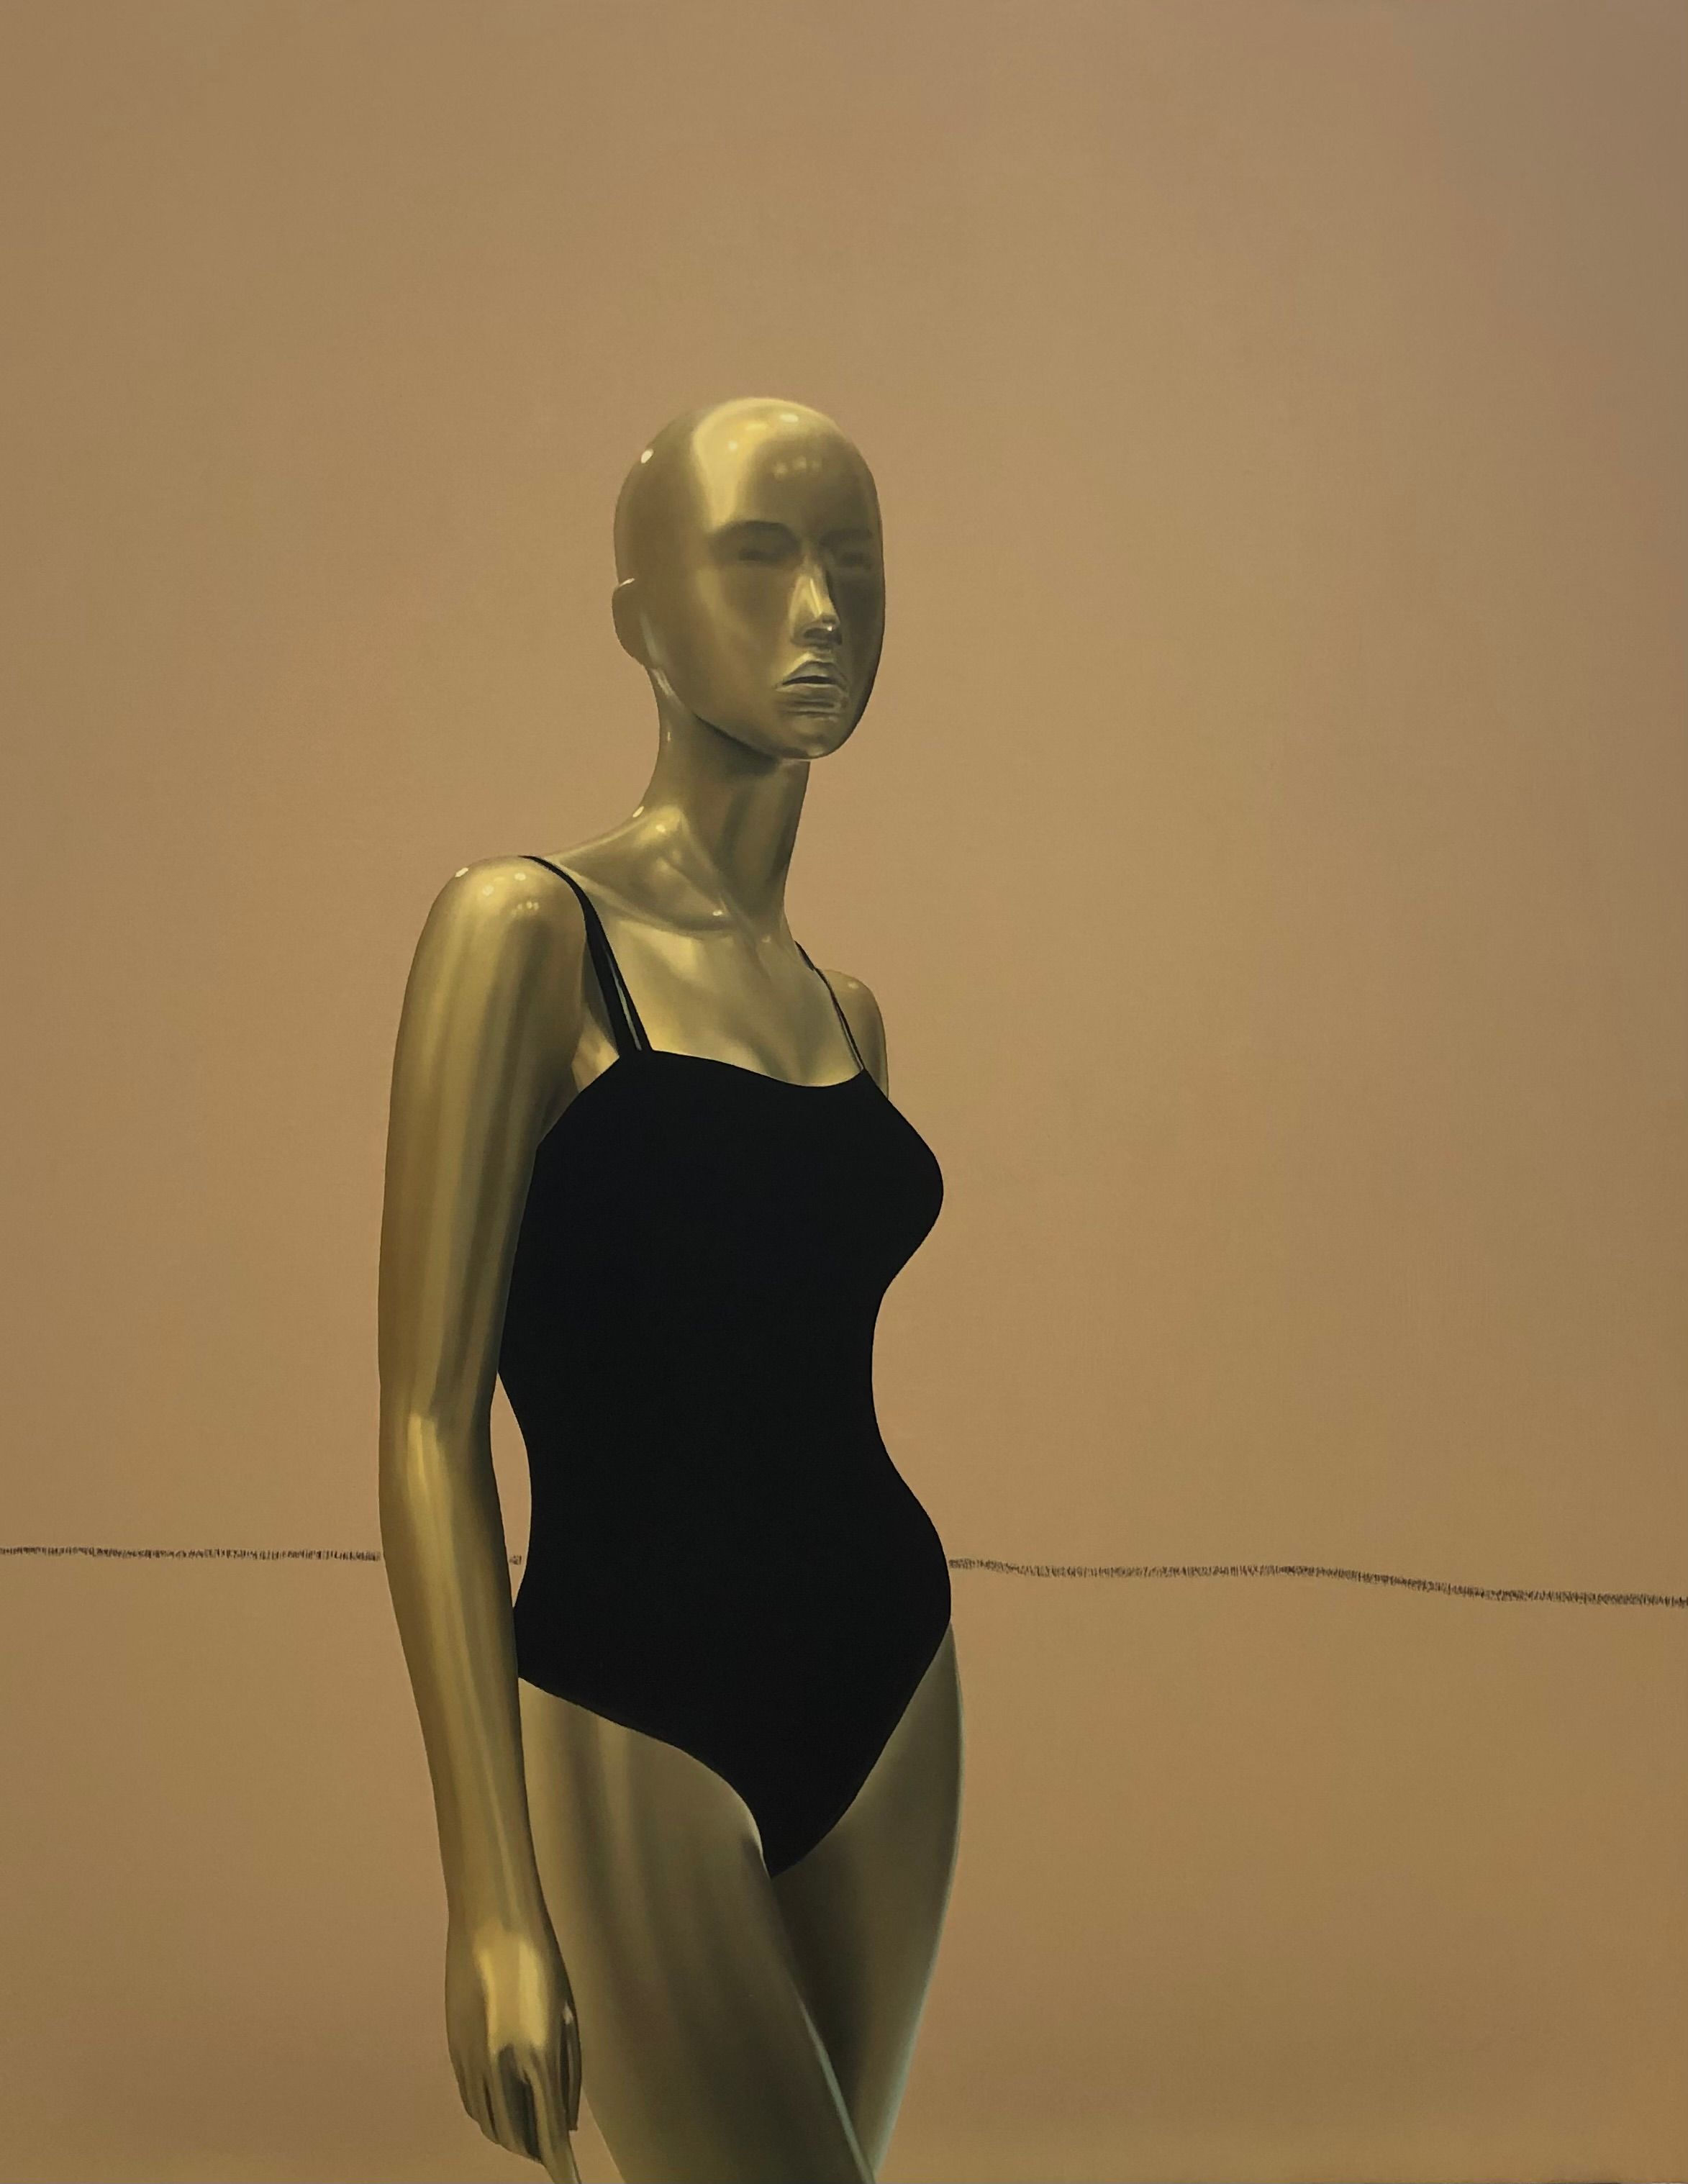 Mannequin in black bathing suit with a minimalistic beige background.